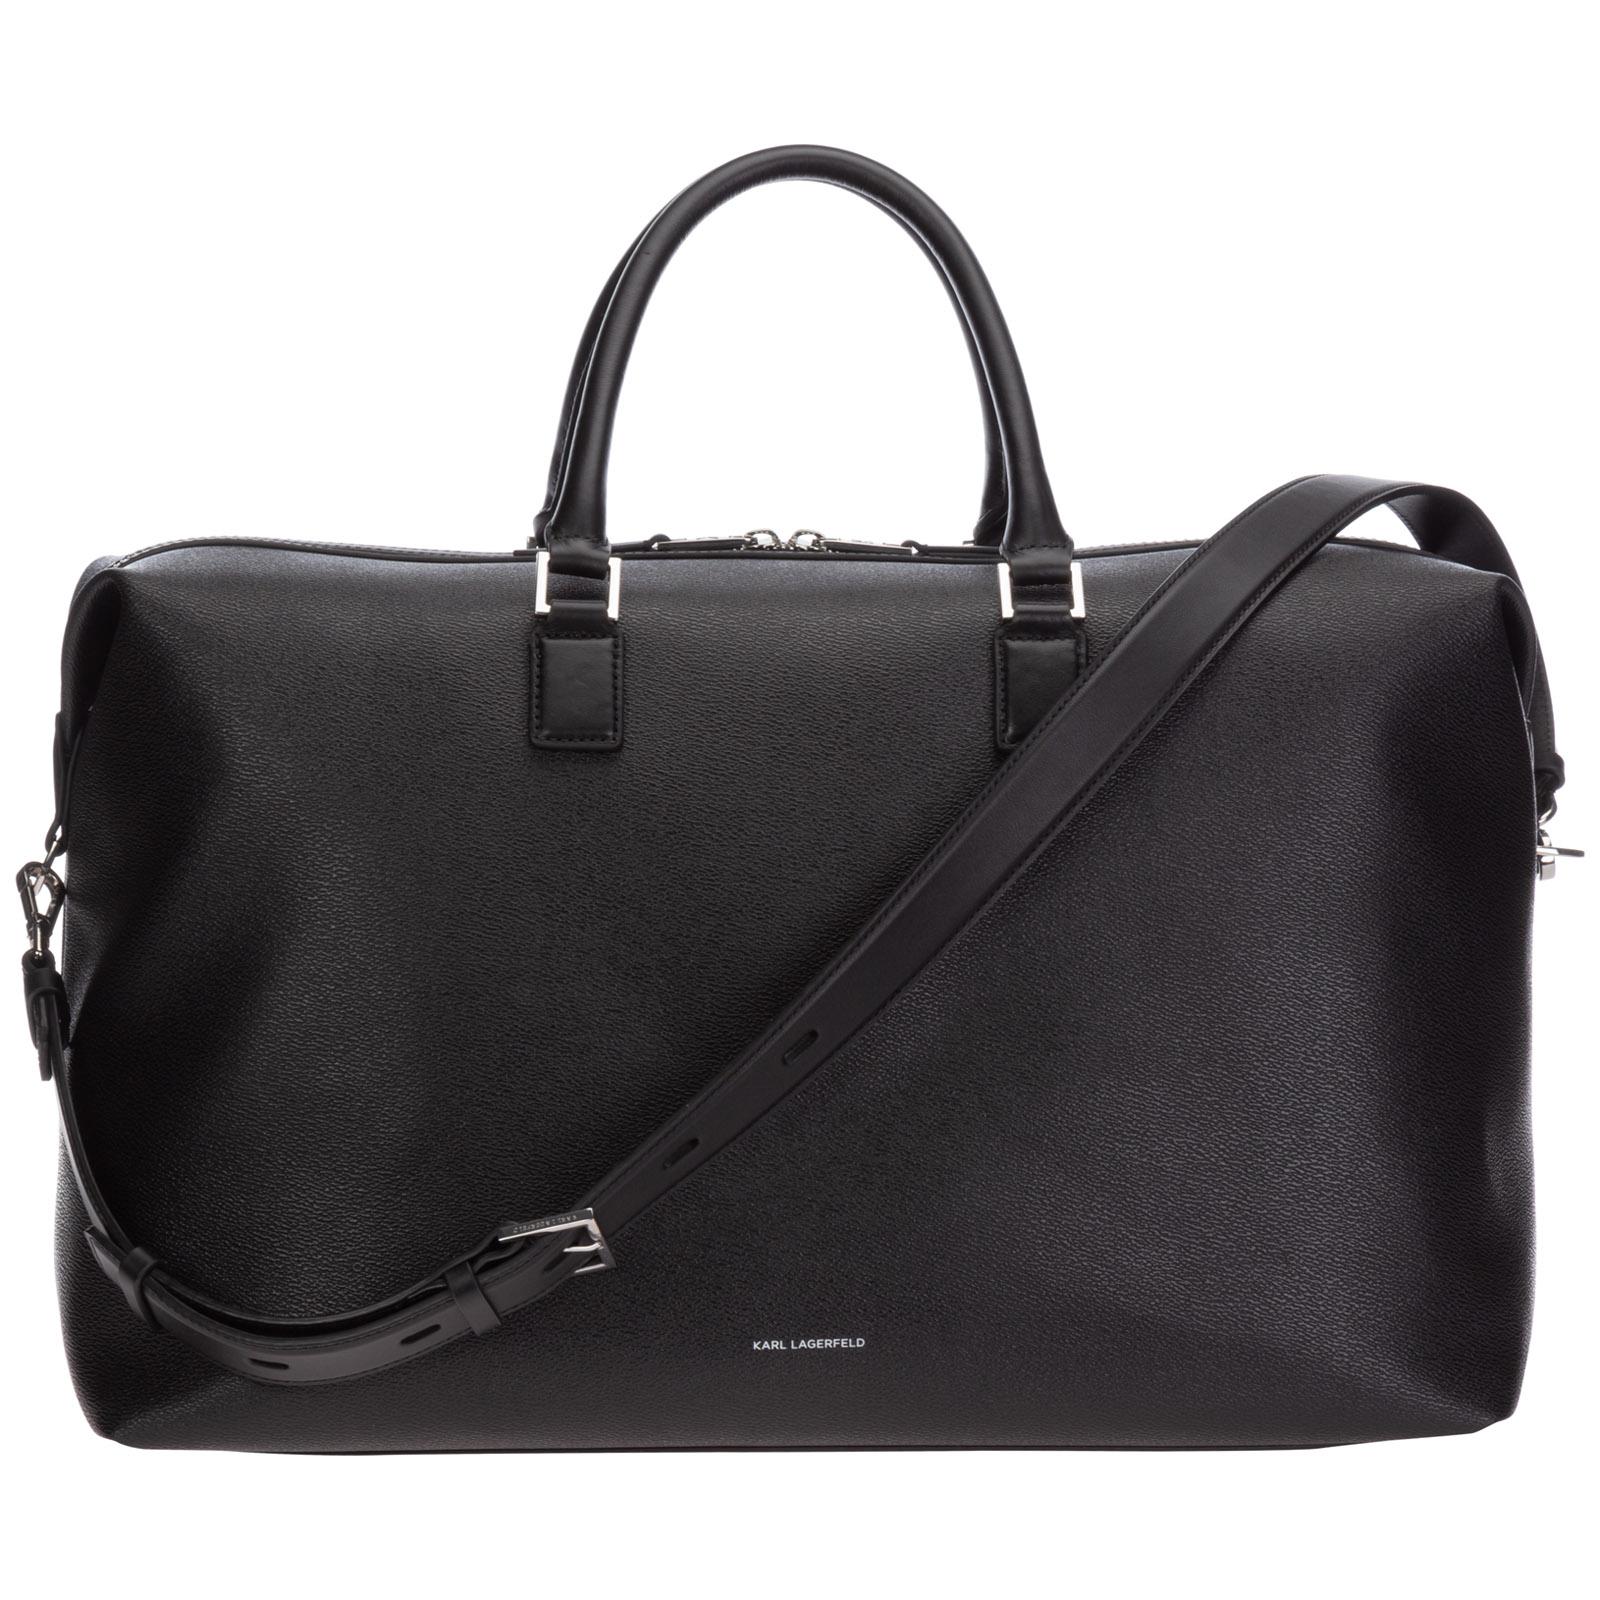 Karl Lagerfeld Cotton Rue St-guillaume Duffle Bag in Black - Lyst